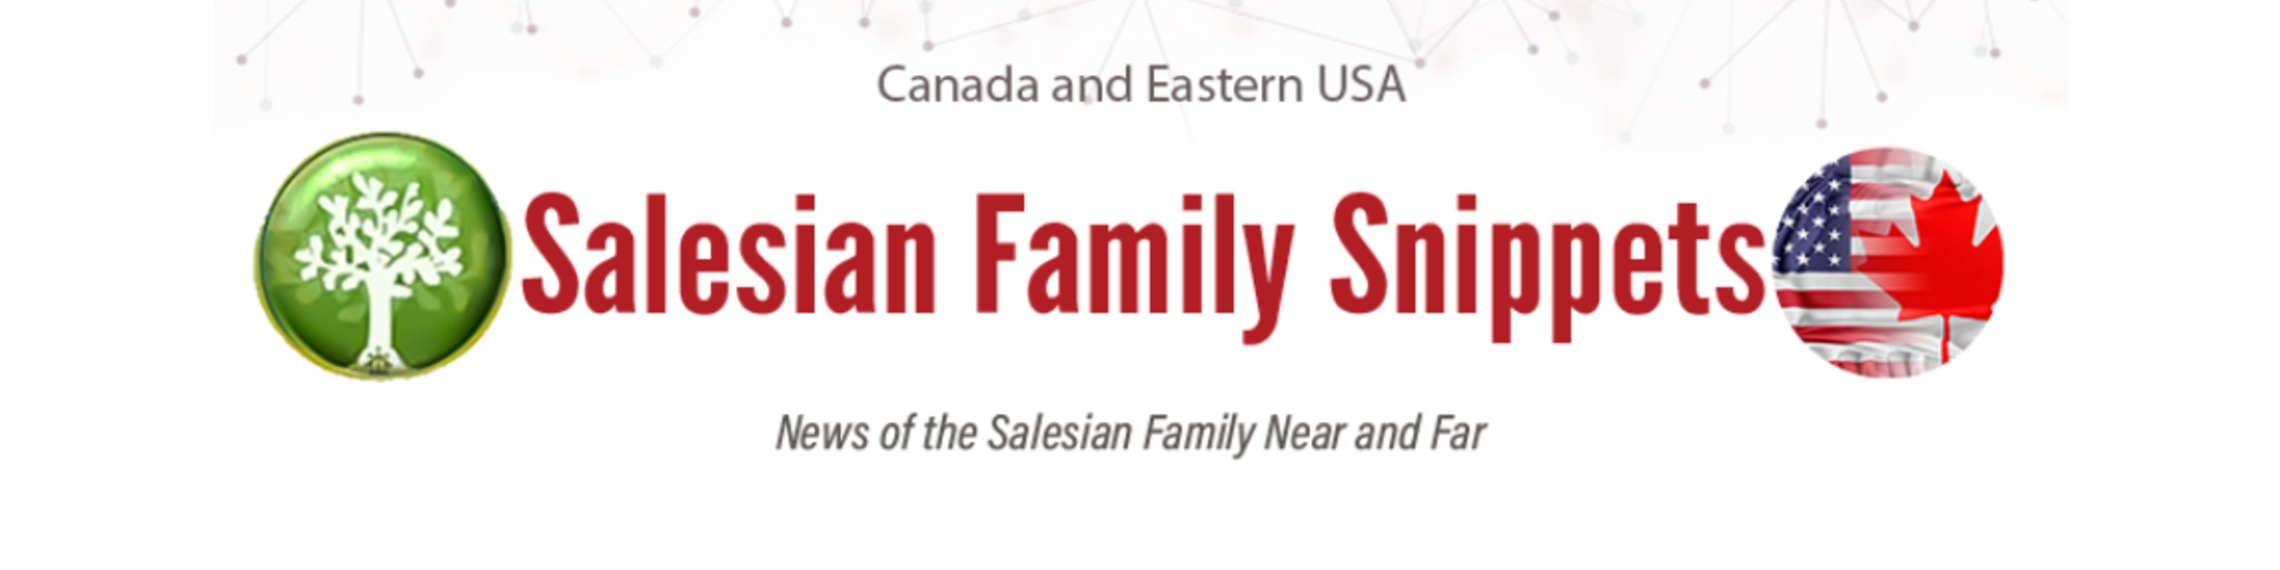 Salesian Family Snippets